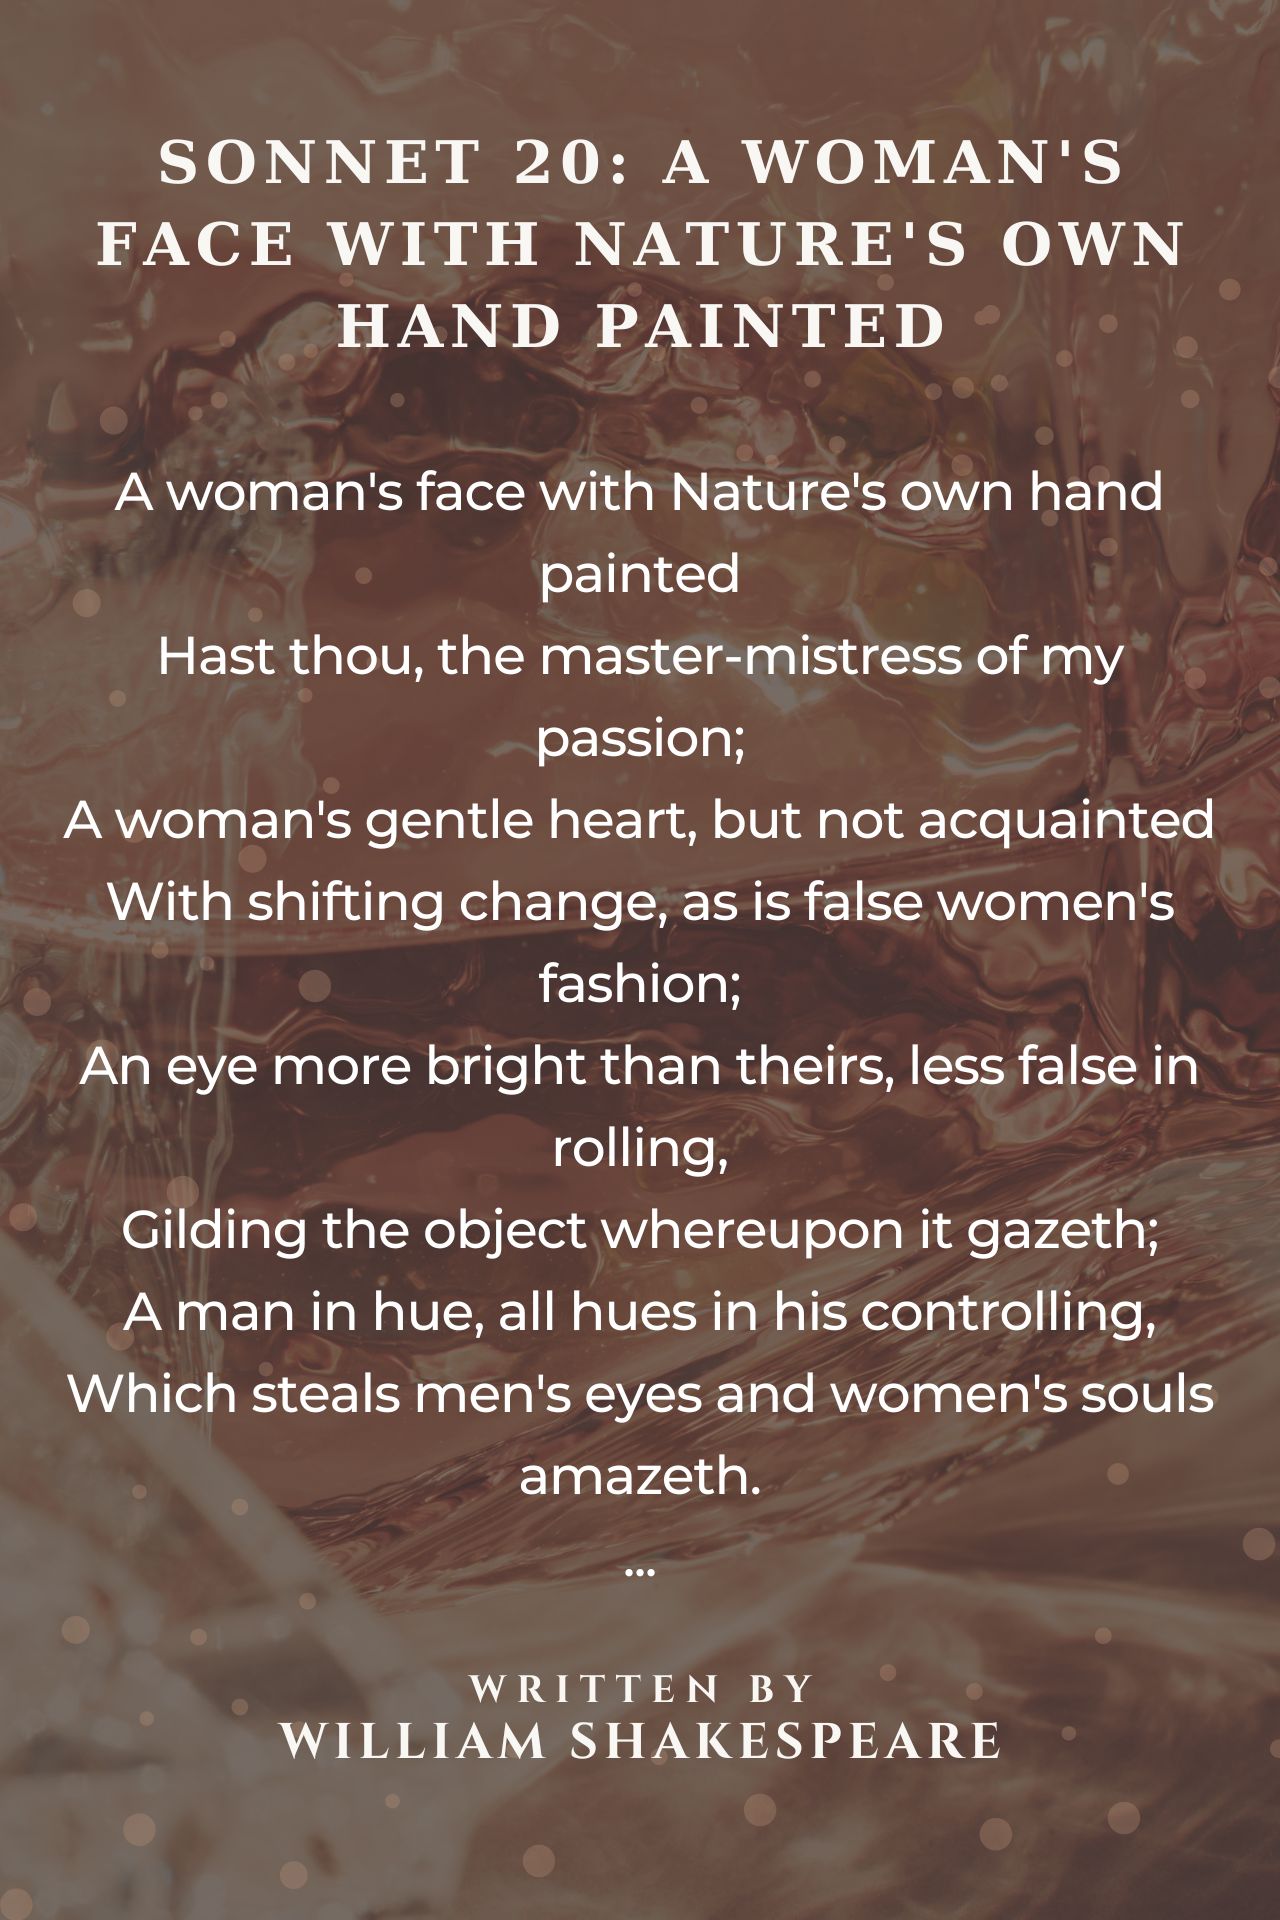 Sonnet 20: A Woman's Face With Nature's Own Hand Painted